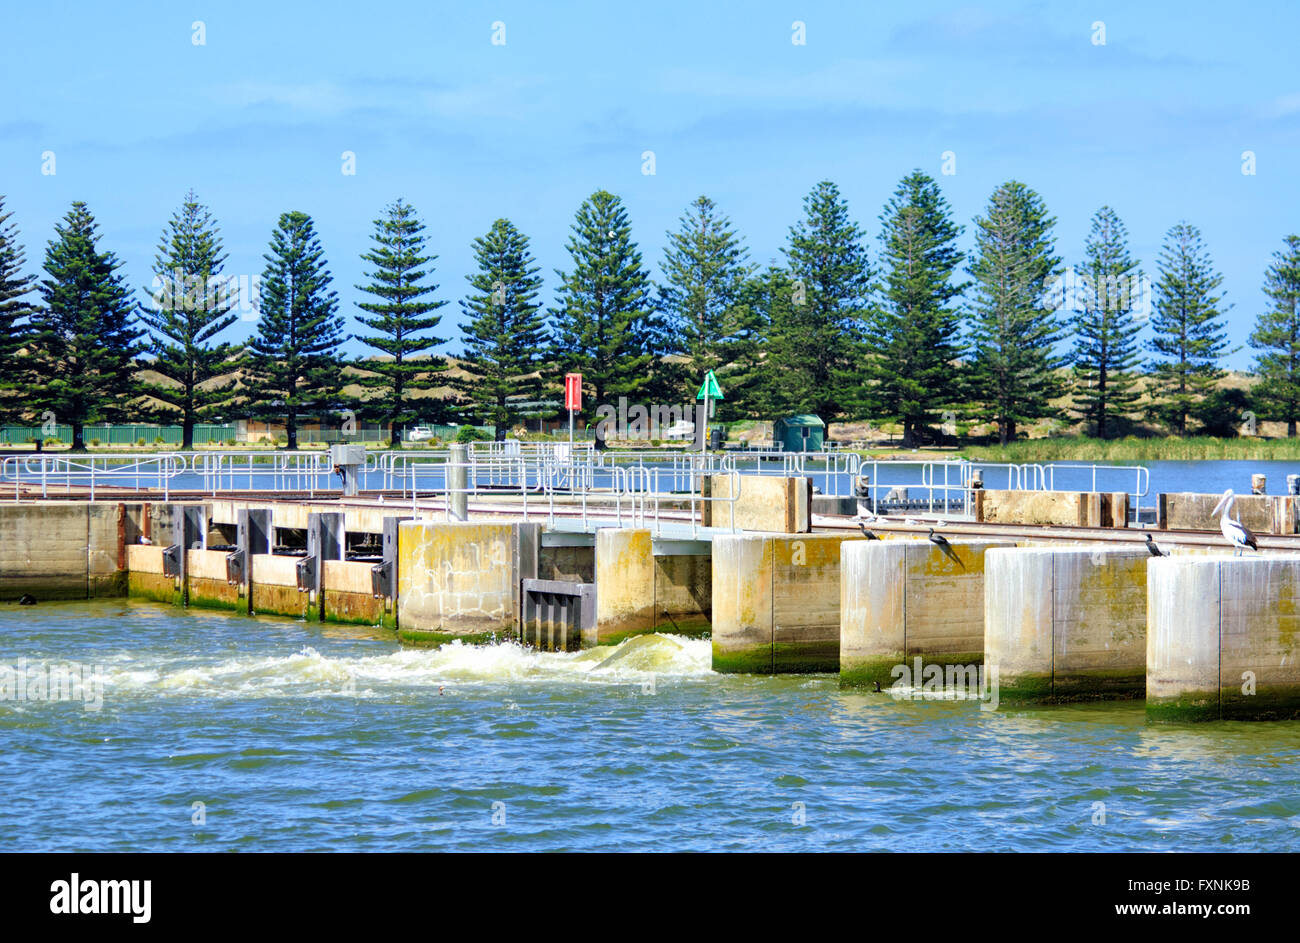 Goolwa Barrage, South Australia. This lock allows boats to reach the Cooring and Murray River mouth from Goolwa. Stock Photo